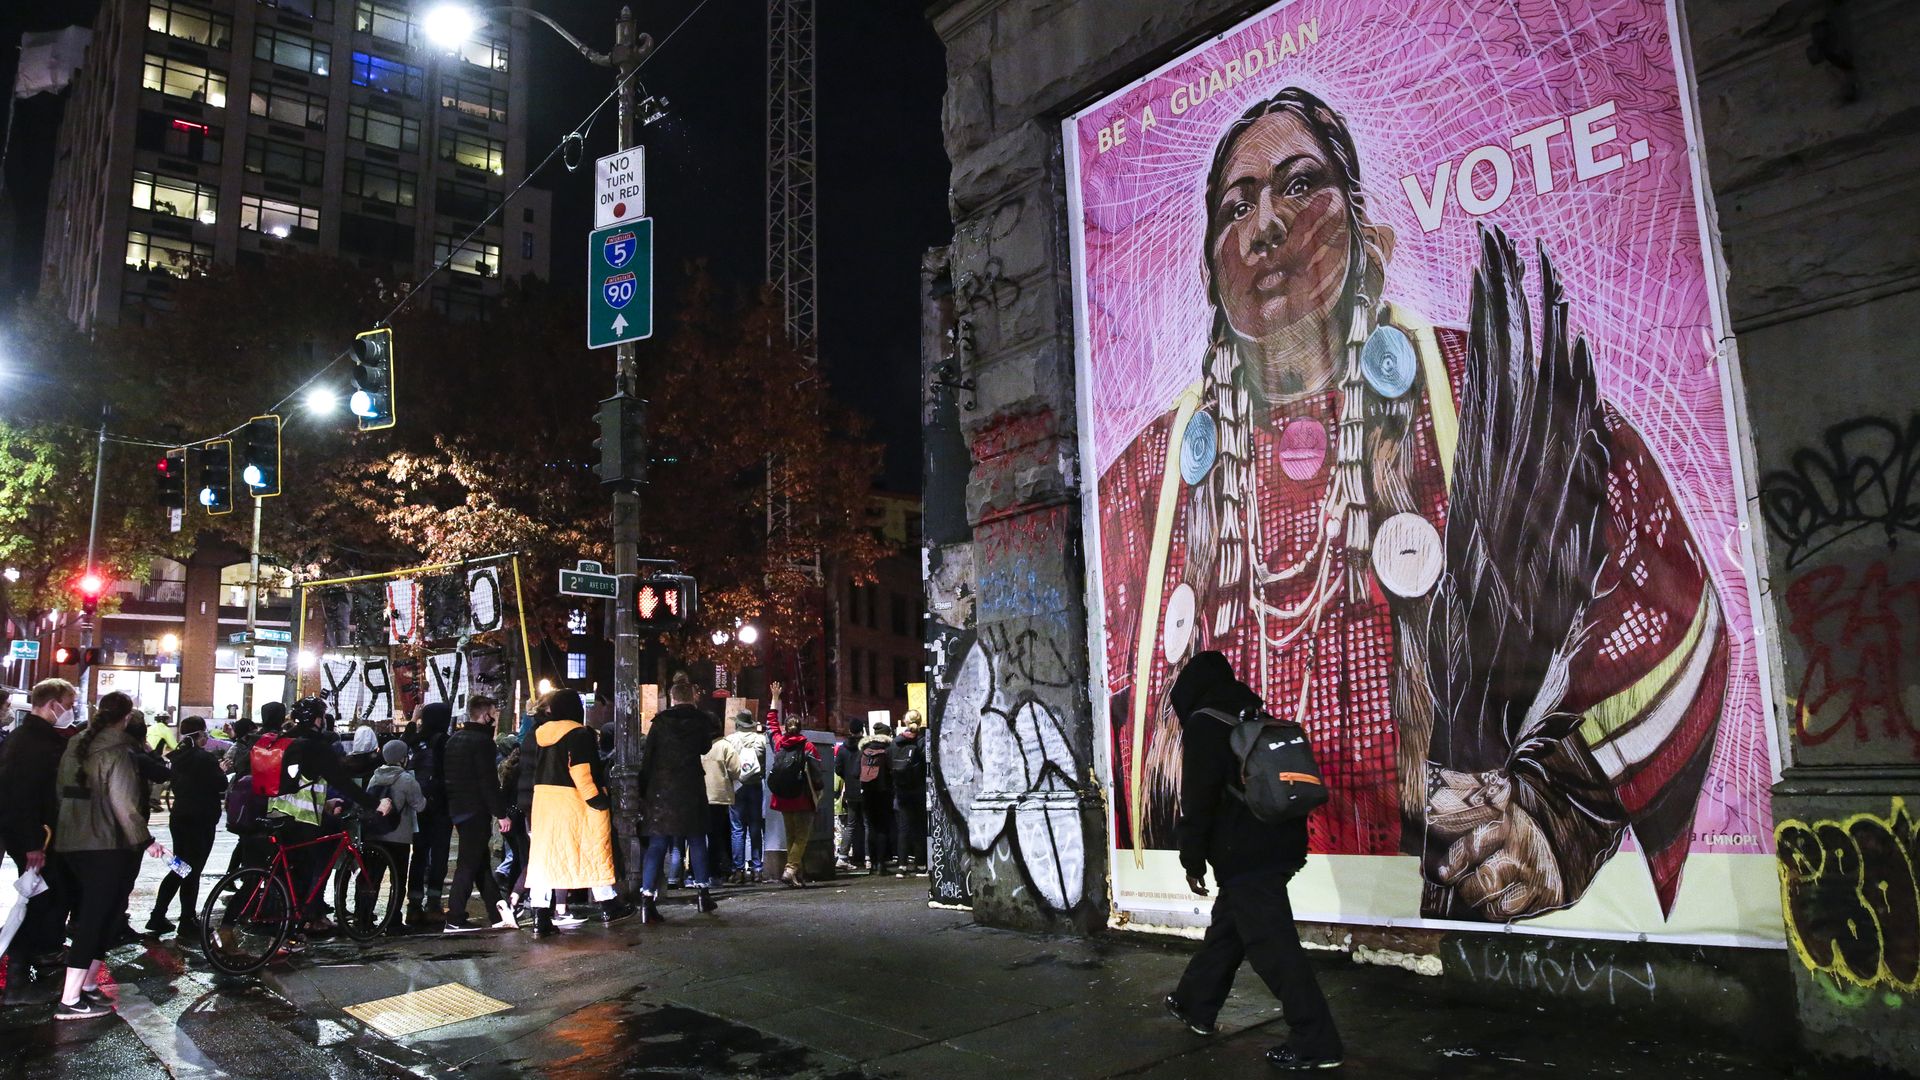 Protestors walk past an image of a Native American woman during a march to "Count Every Vote, Protect Every Person" on the day after the US Presidential Election in Seattle.